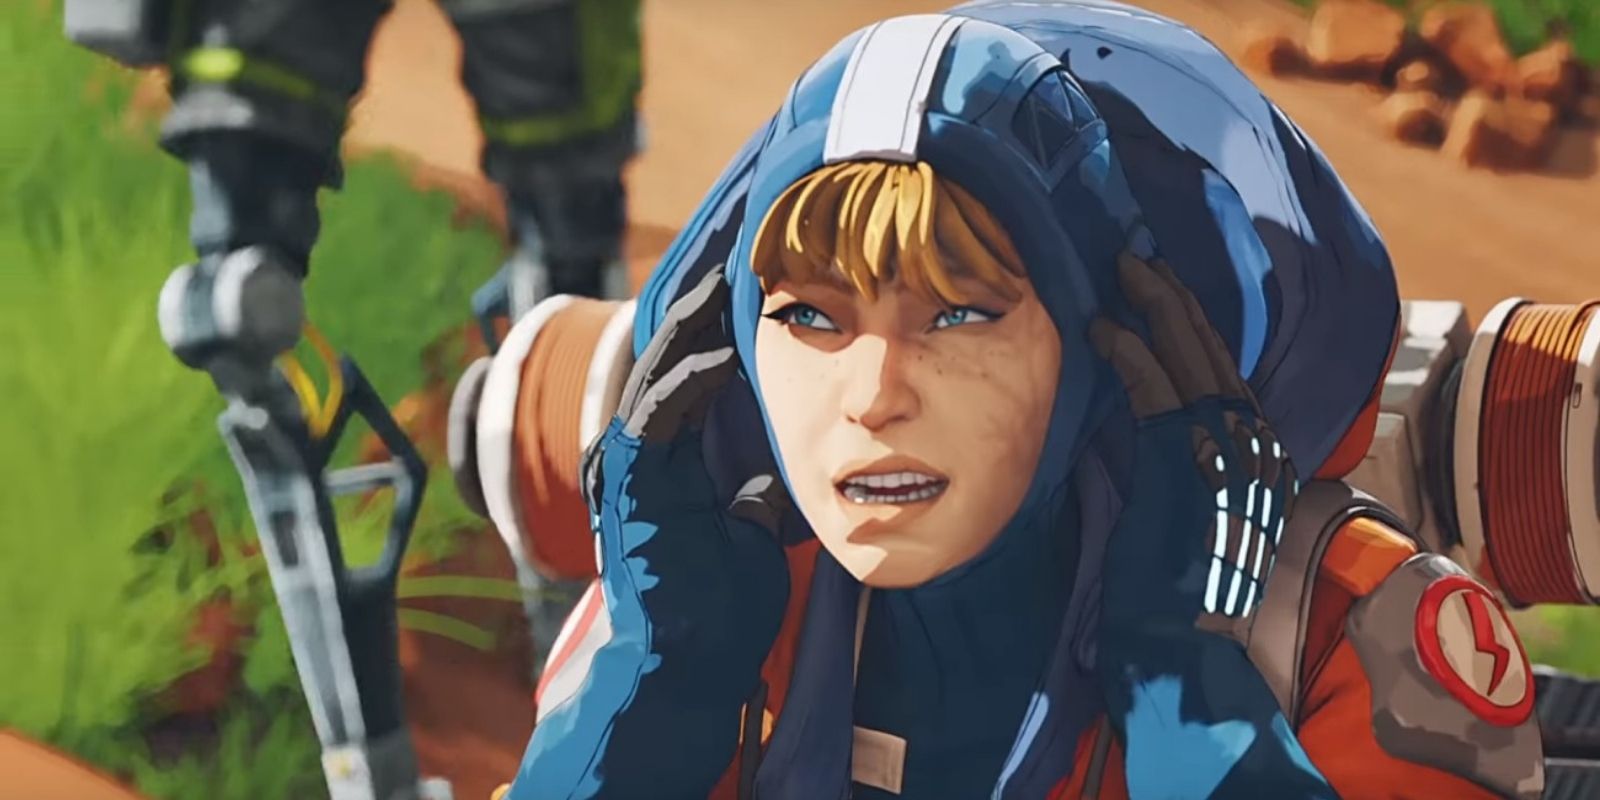 Apex Legends Developer Working on New Single-Player Project